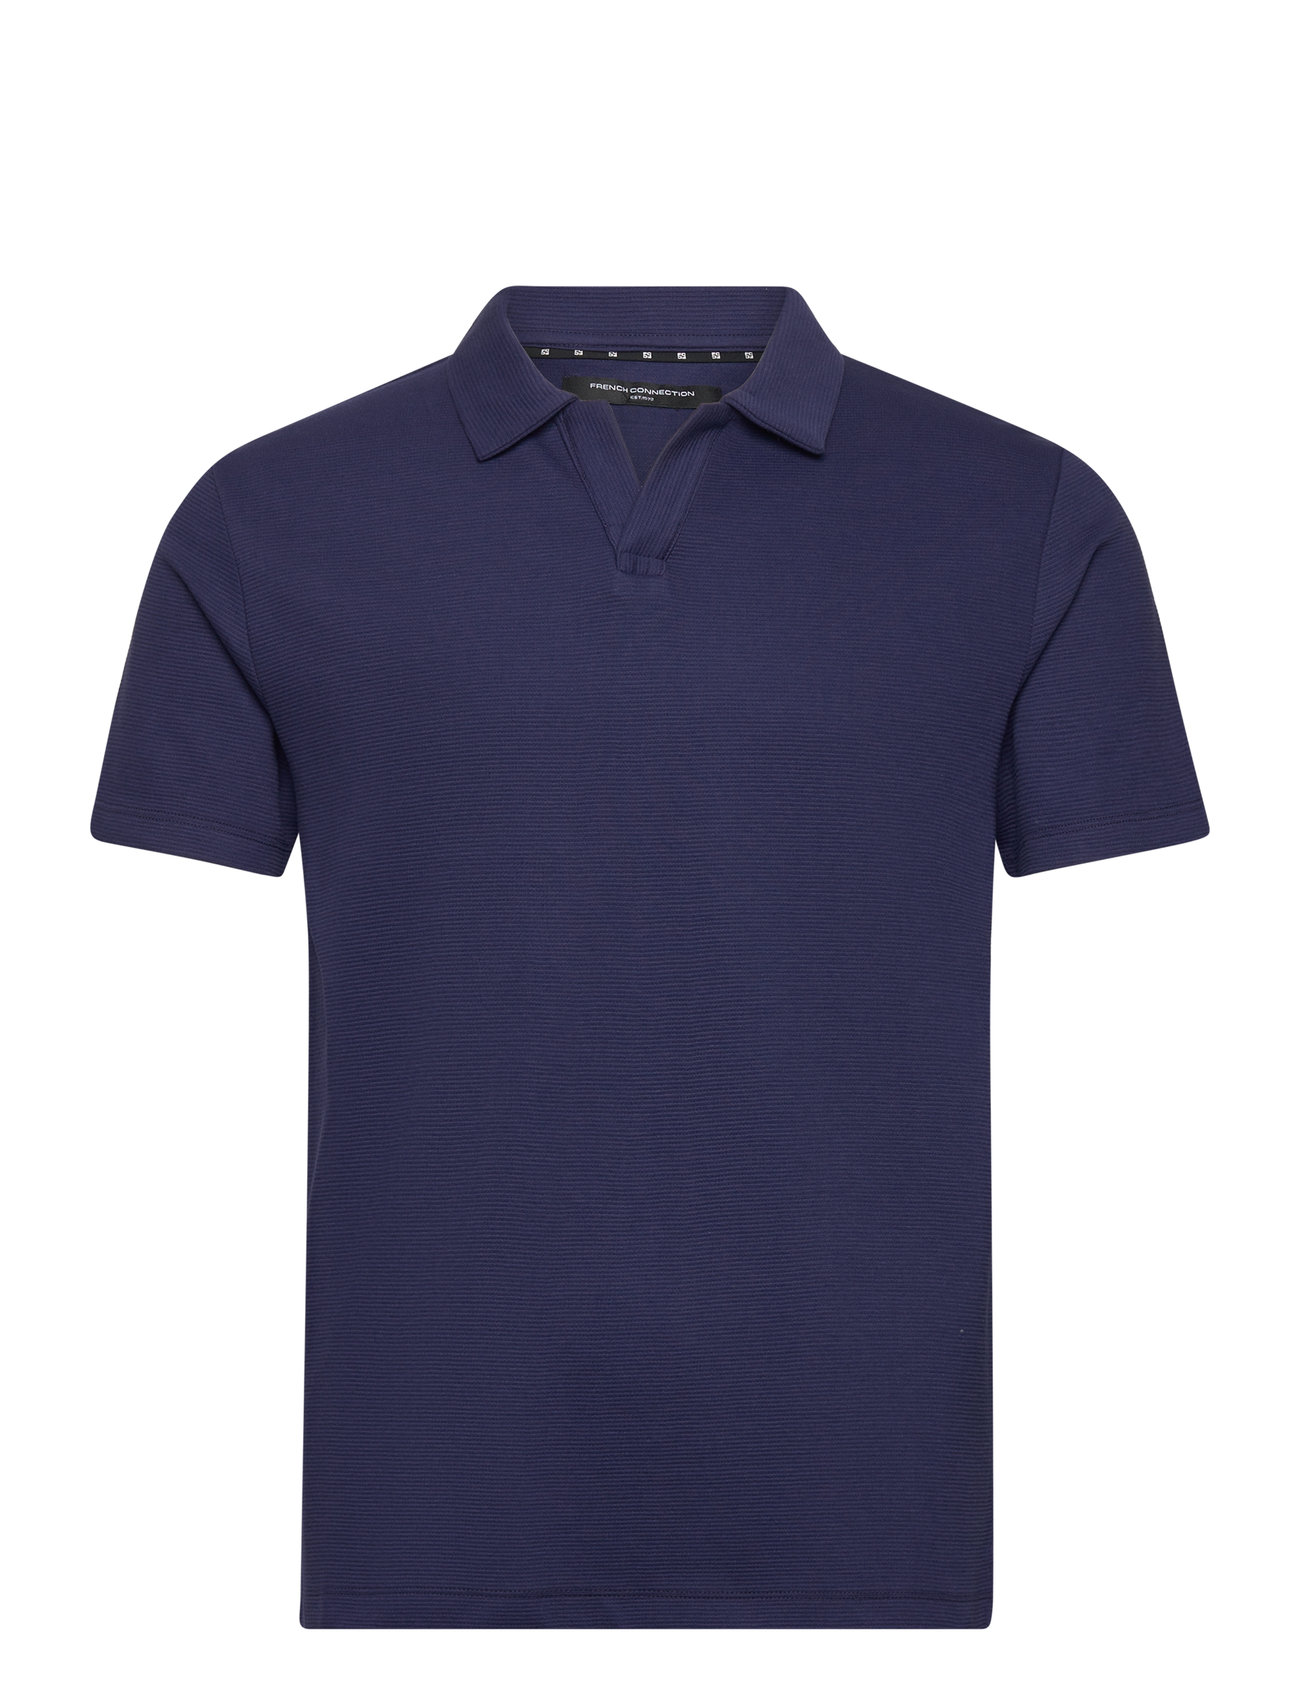 Ss Ottoman Trophy Neck Polo Tops Polos Short-sleeved Navy French Connection